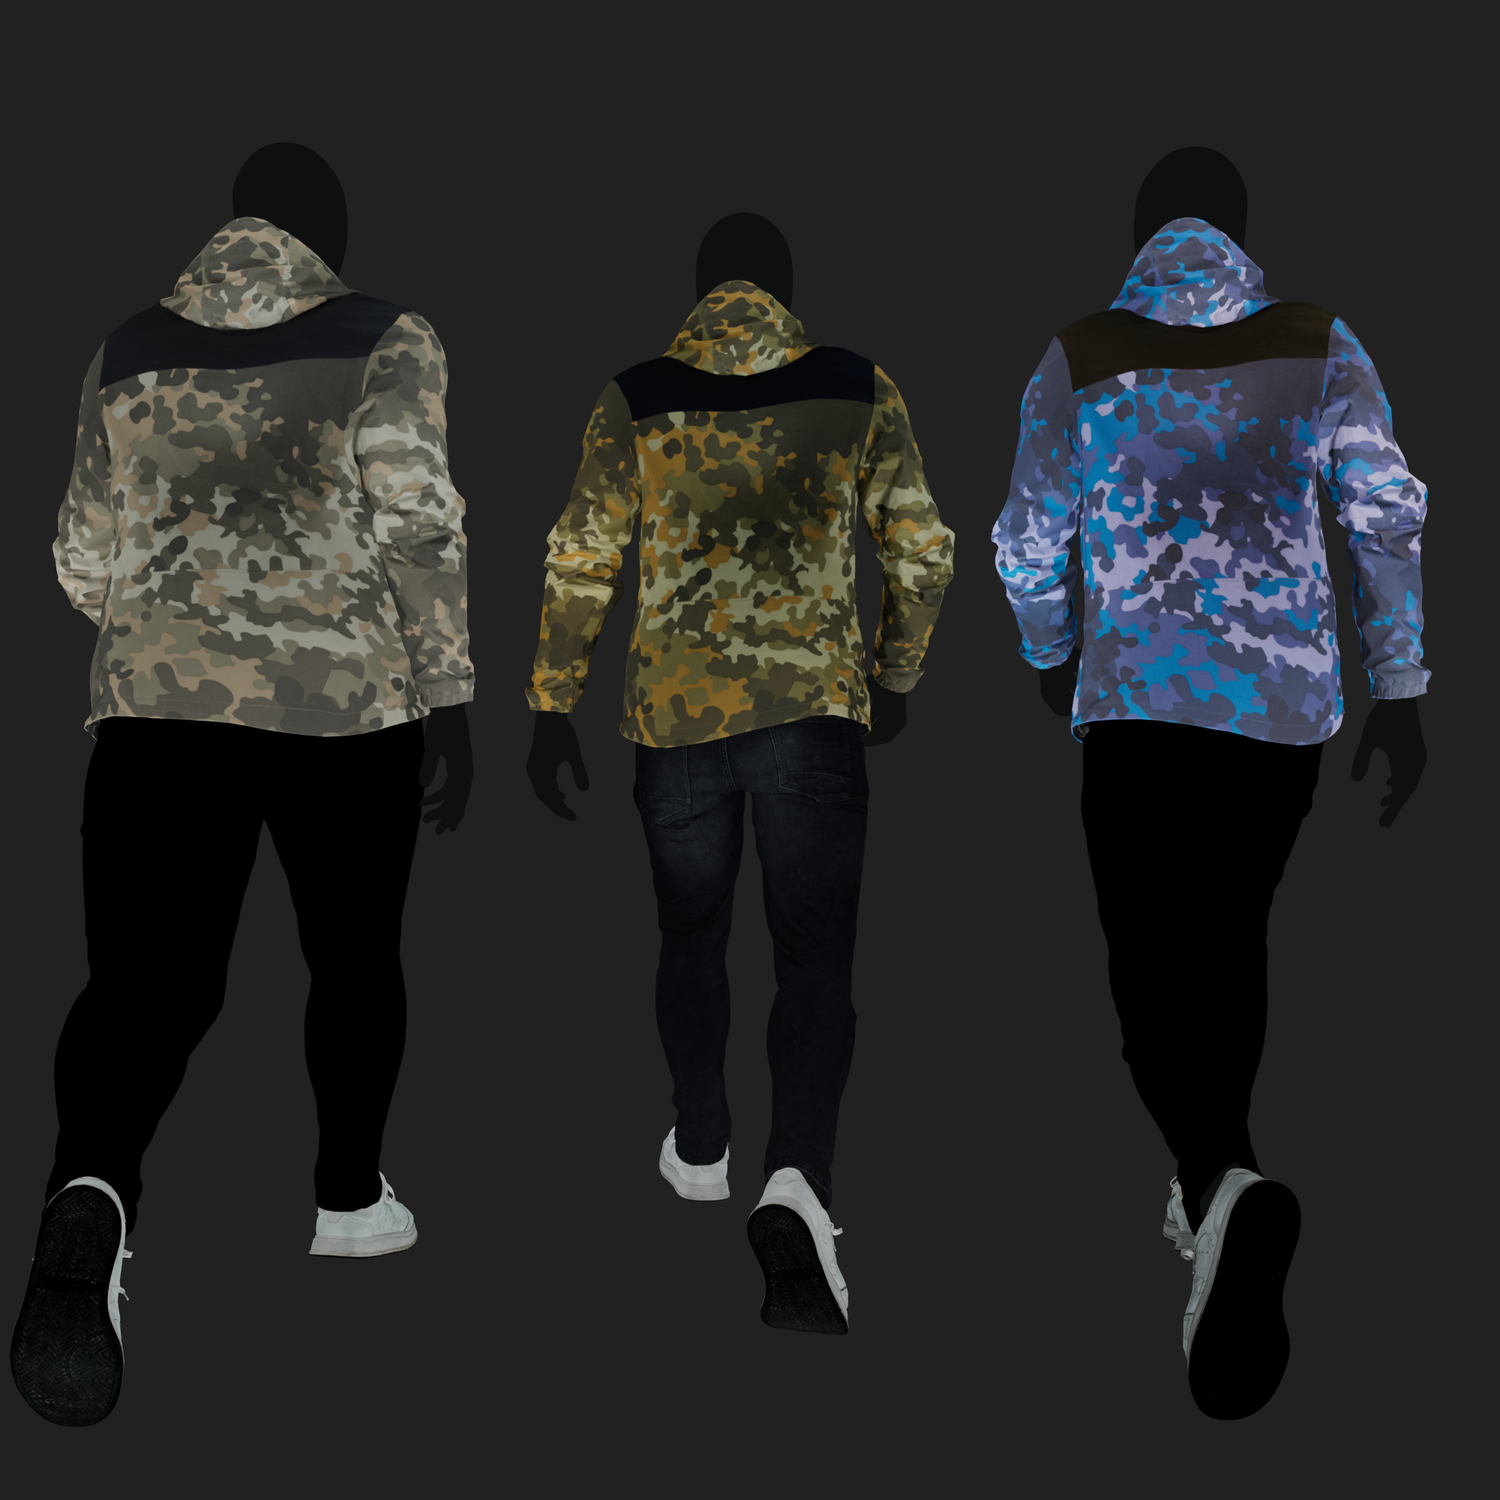 Albedo (Diffuse) map rendering of a 3D model of an animated walking male character dressed in a Camouflage Jacket and Jeans - back view